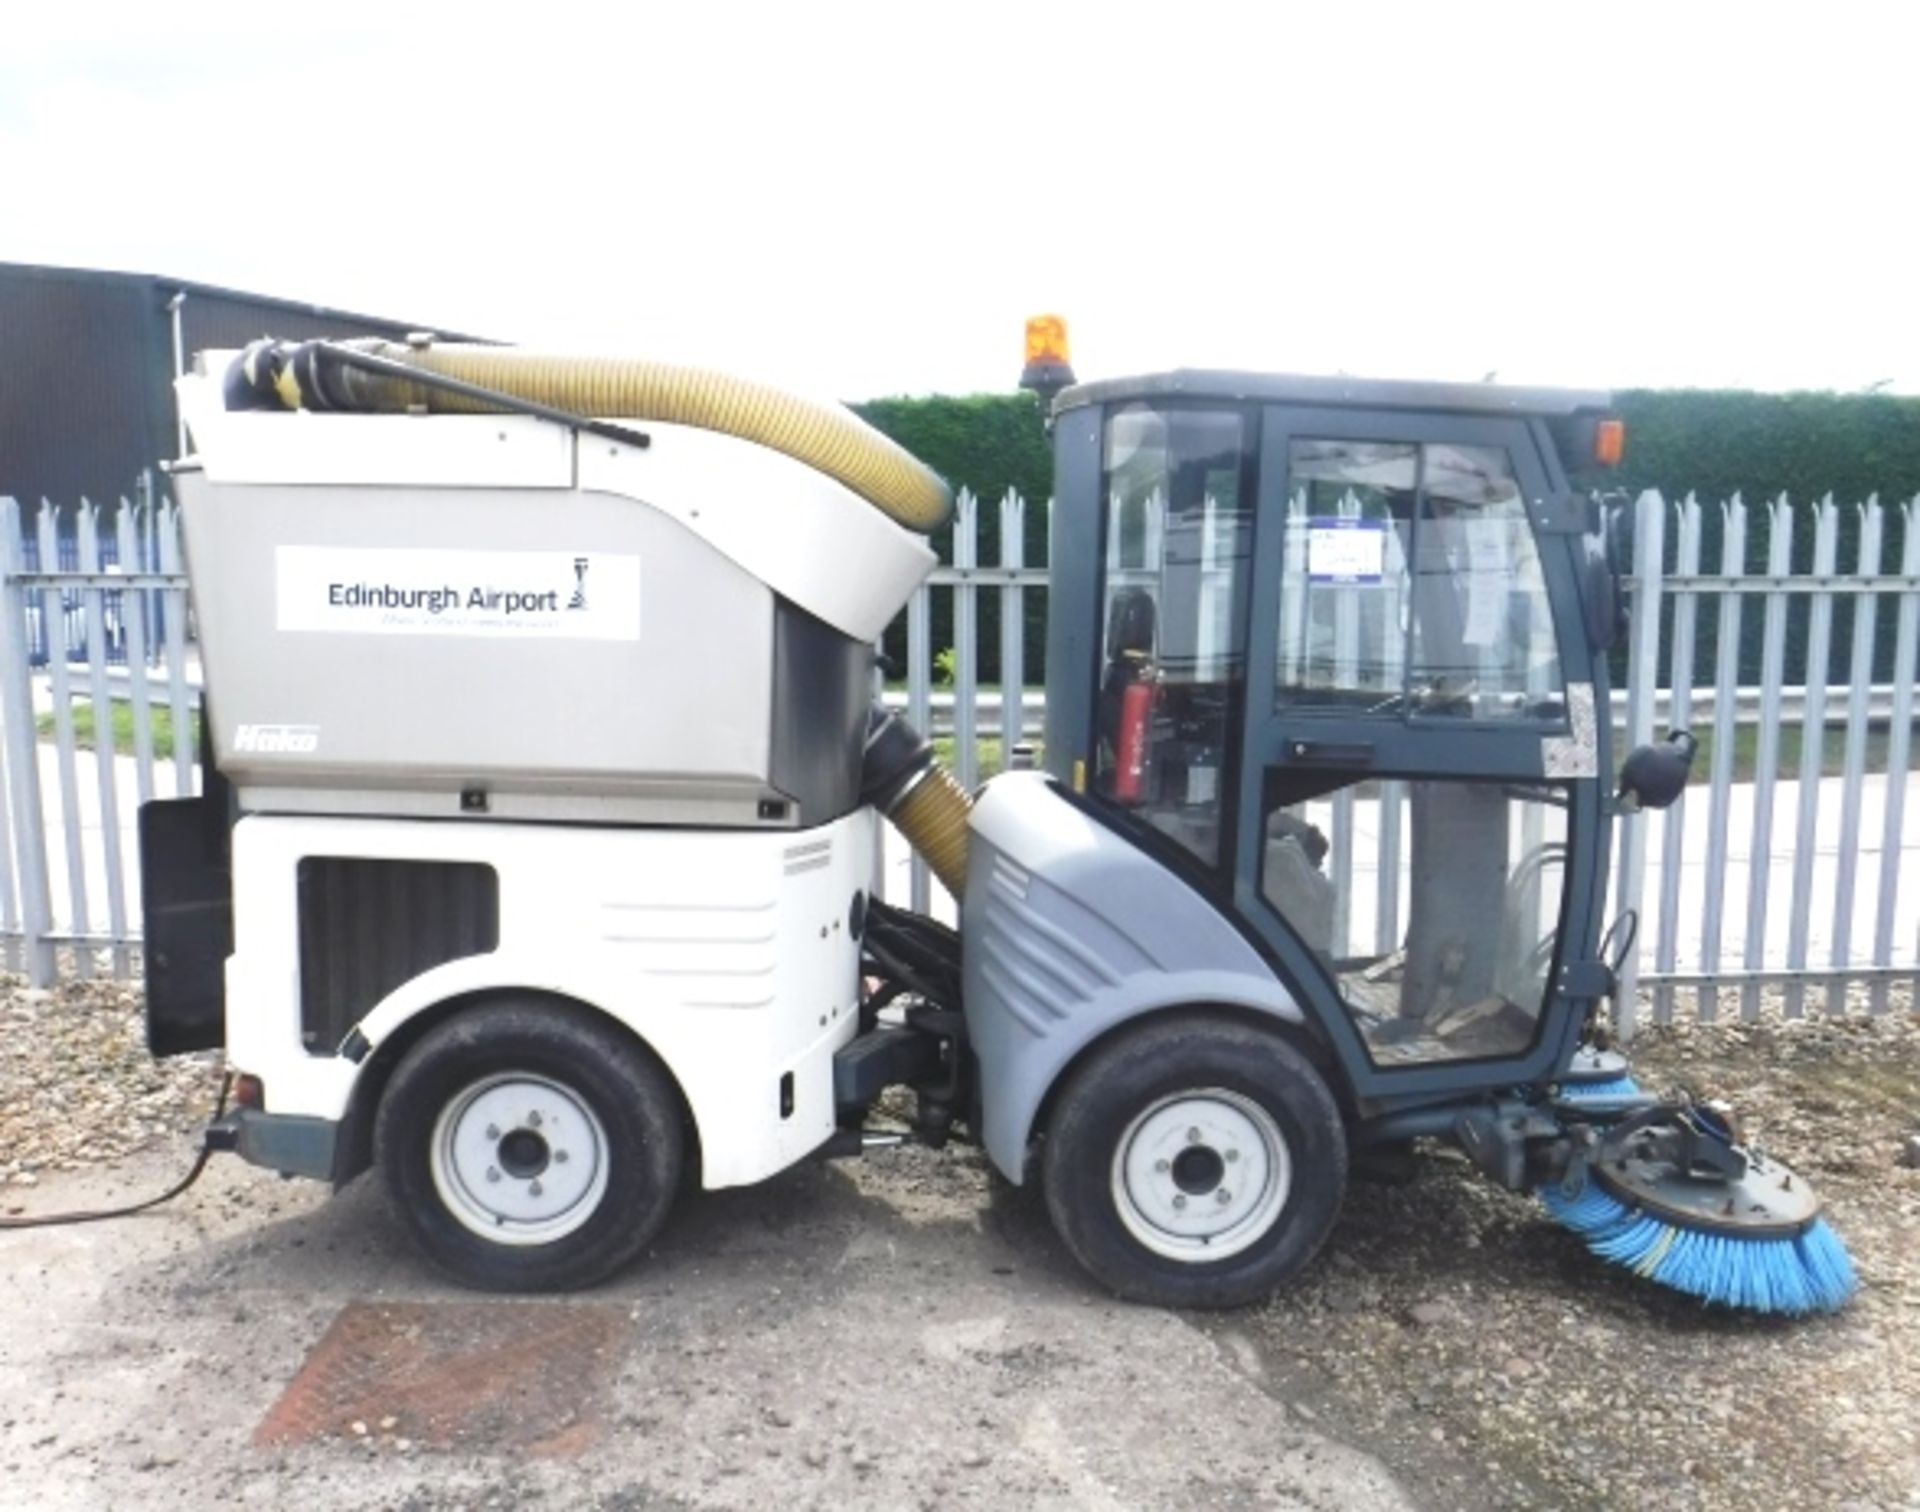 HAKO Citymaster 1200 road sweeper. CE Marked. - Image 2 of 10